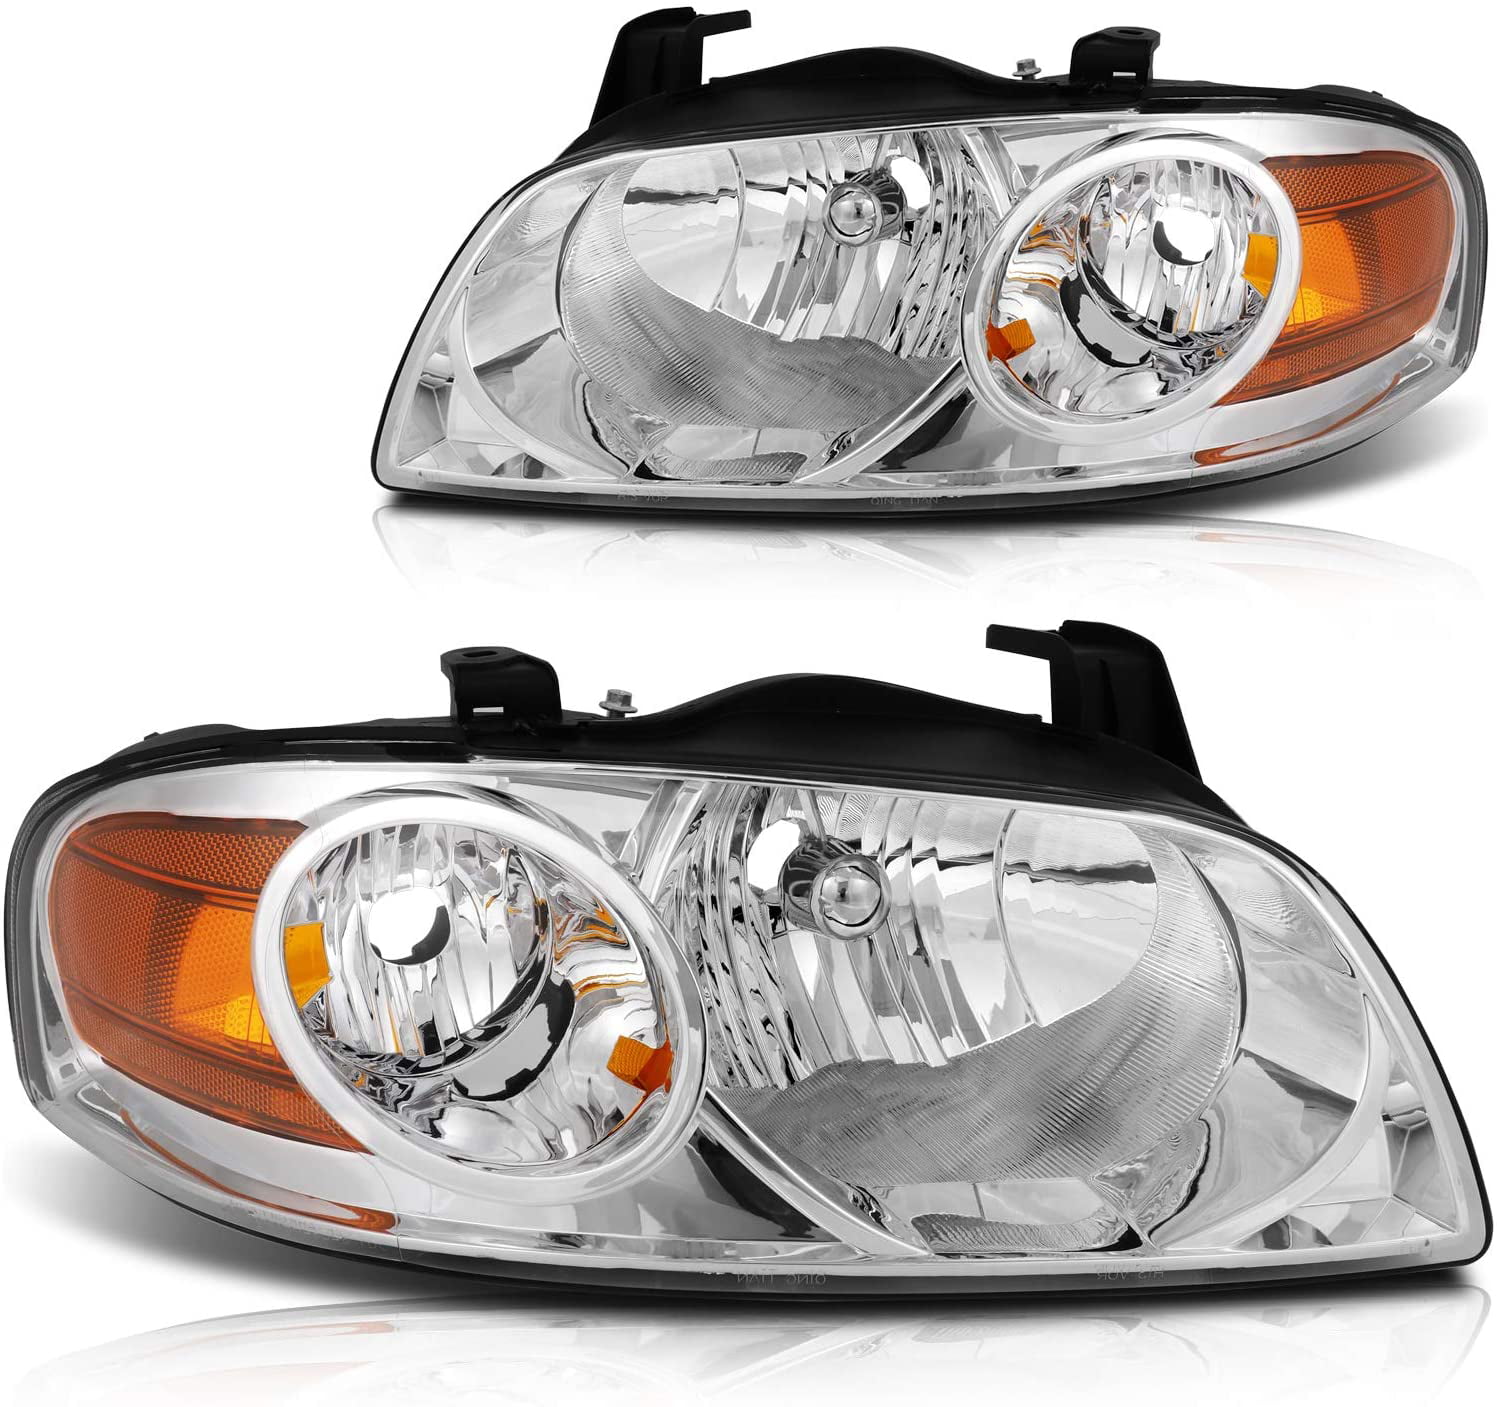 Headlight Assembly Passenger Driver Side Compatible with 2004 2005 2006 Nissan Sentra Factory Style Headlamp Lens Replacement Chrome 